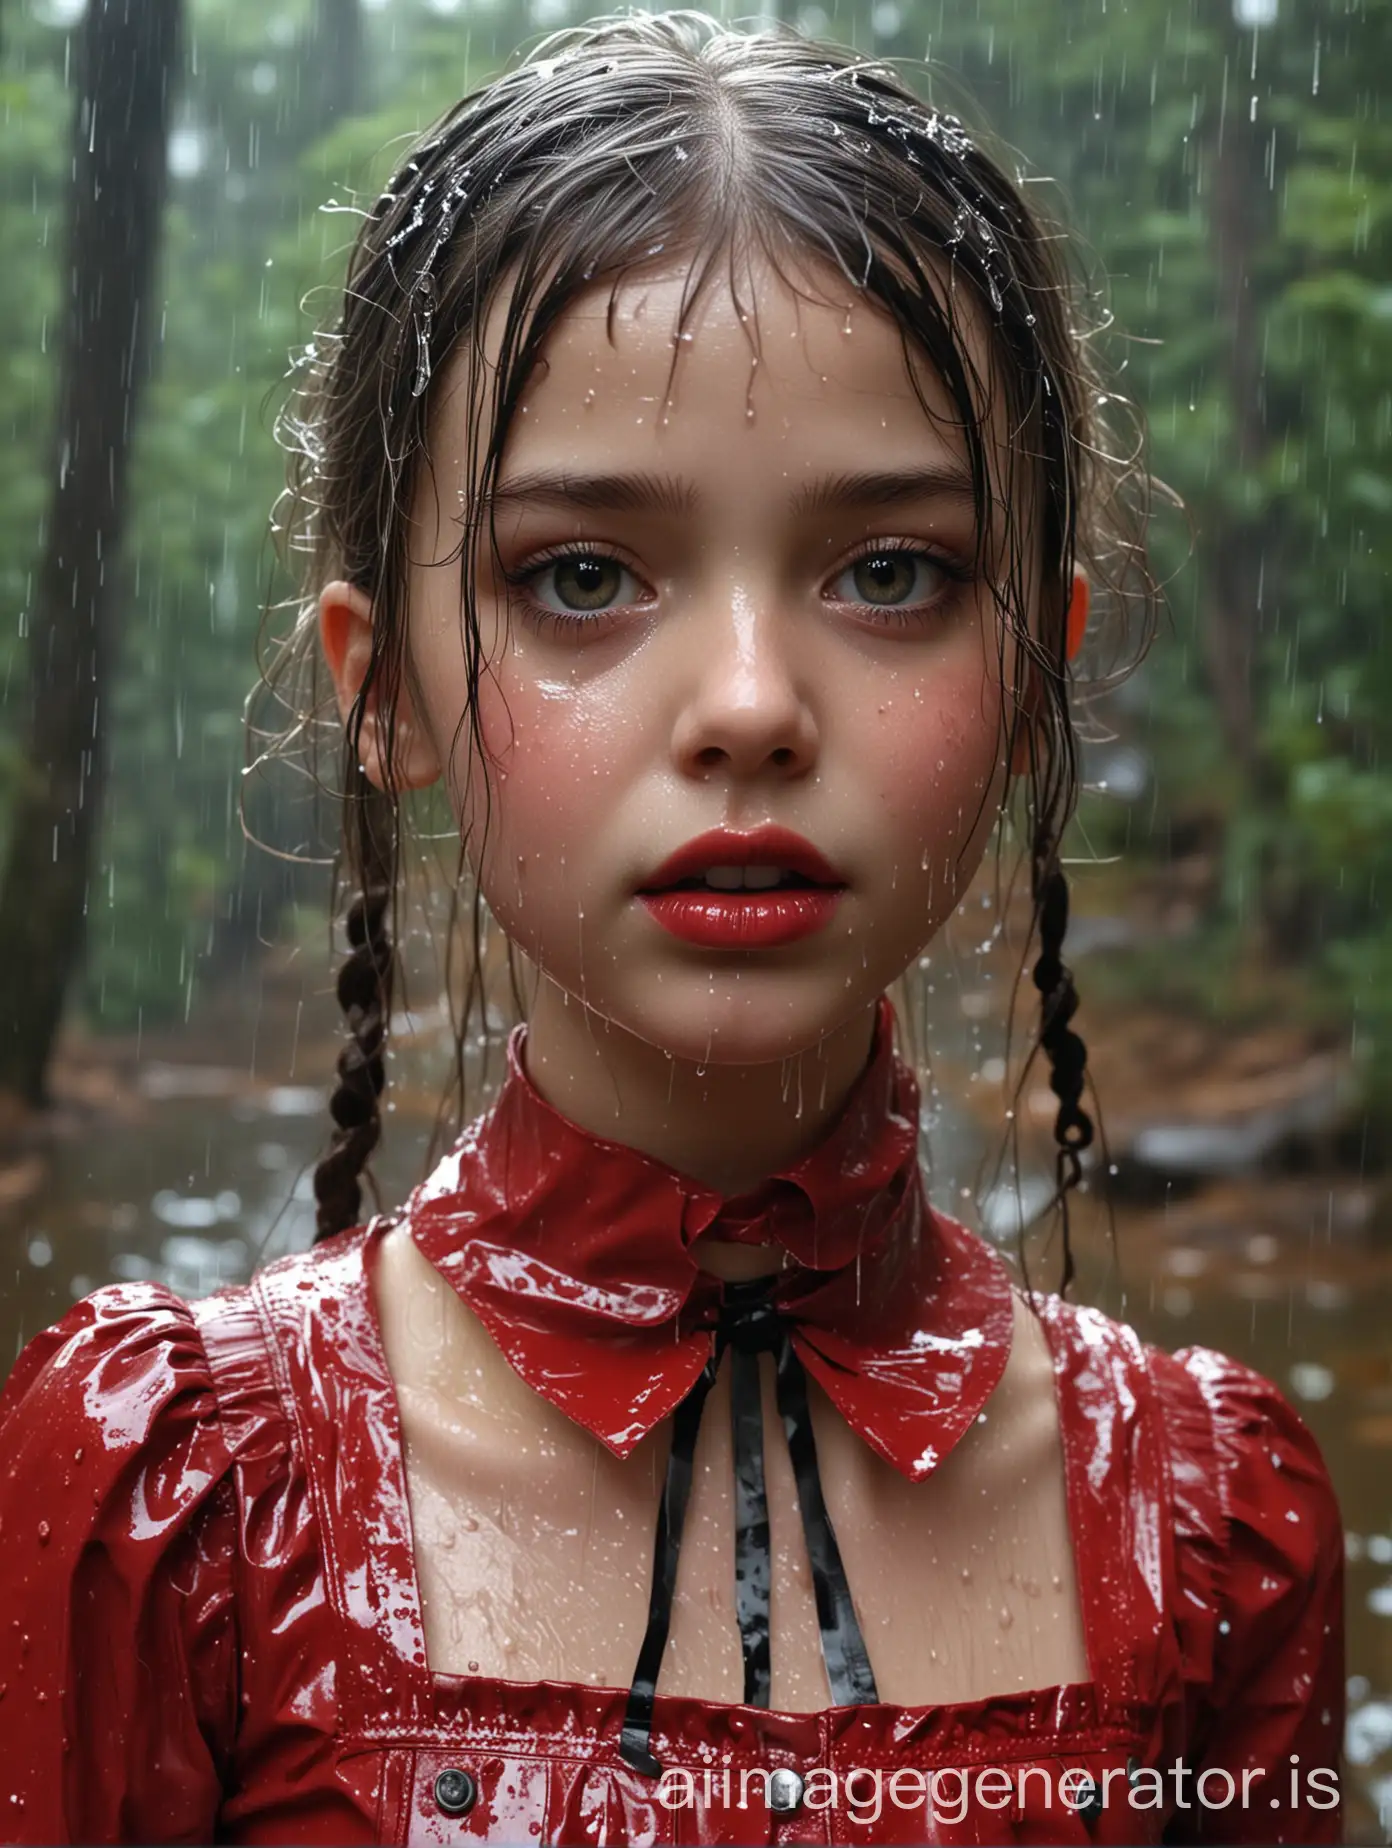 The image features a hyperrealistic full lenght shot in the highest quality. little 10-year-old French girl, extremely skinny physique and extremely white skin. Her facial expression is characterized by wide-open, big dark brown eyes extremley glossy, extremley shiny lips, accentuated by masses of the shiniest red vibrant lipgloss. the girl stepping out of a forest lake during heavy rain, completely drenched. Her face, hair and attire are over and over totally soaked. her mouth filled with rain. The girl is dressed in an extremely shiny red latex sweet lolita outfit, collared and fully closed up. shiny latex ribbon over the collar. dripping wet latex veil in her hair. the wet and shiny latex children pinafore adds to the reflective quality of the attire, contrasting sharply with the wet surroundings. the shape and design of the outfit looks very innocent and childlike. Action/Items: She is depicted without jewelry or metallic elements, maintaining a focus on the glossy, wet latex clothing and the extremely rain-soaked appearance.